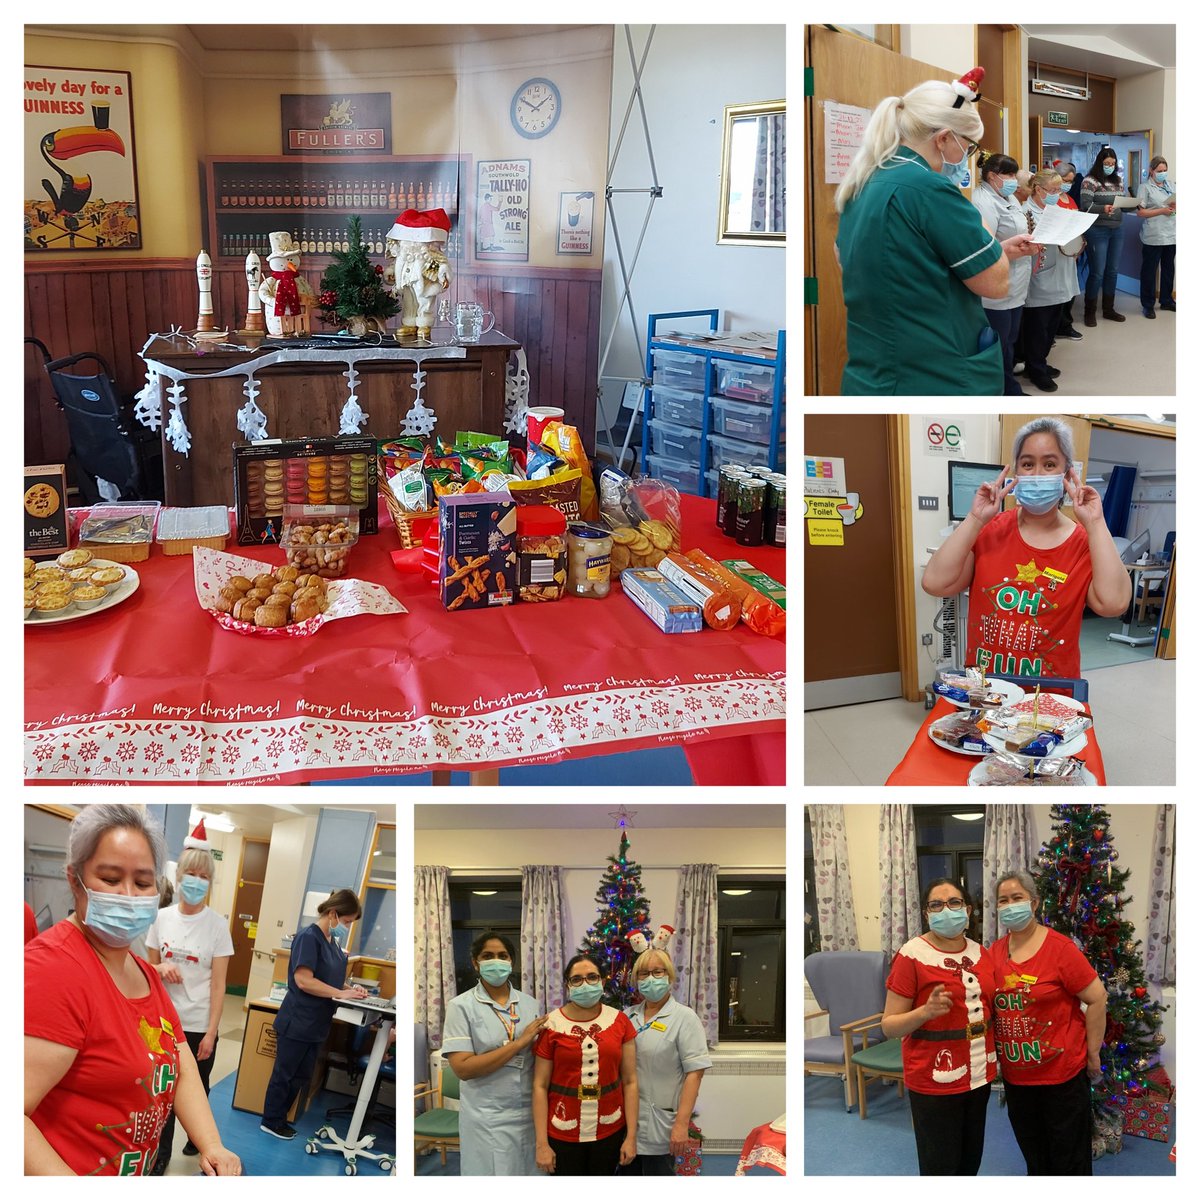 Christmas on Snibston Stroke Unit. Nibbles, goodies, and a staff sing song. Patients loved it, as did the staff and visitors.@LPTnhs @sadiehall74 @MarigoldVV @tinpack02 #oneteamonegoal #positiverehab